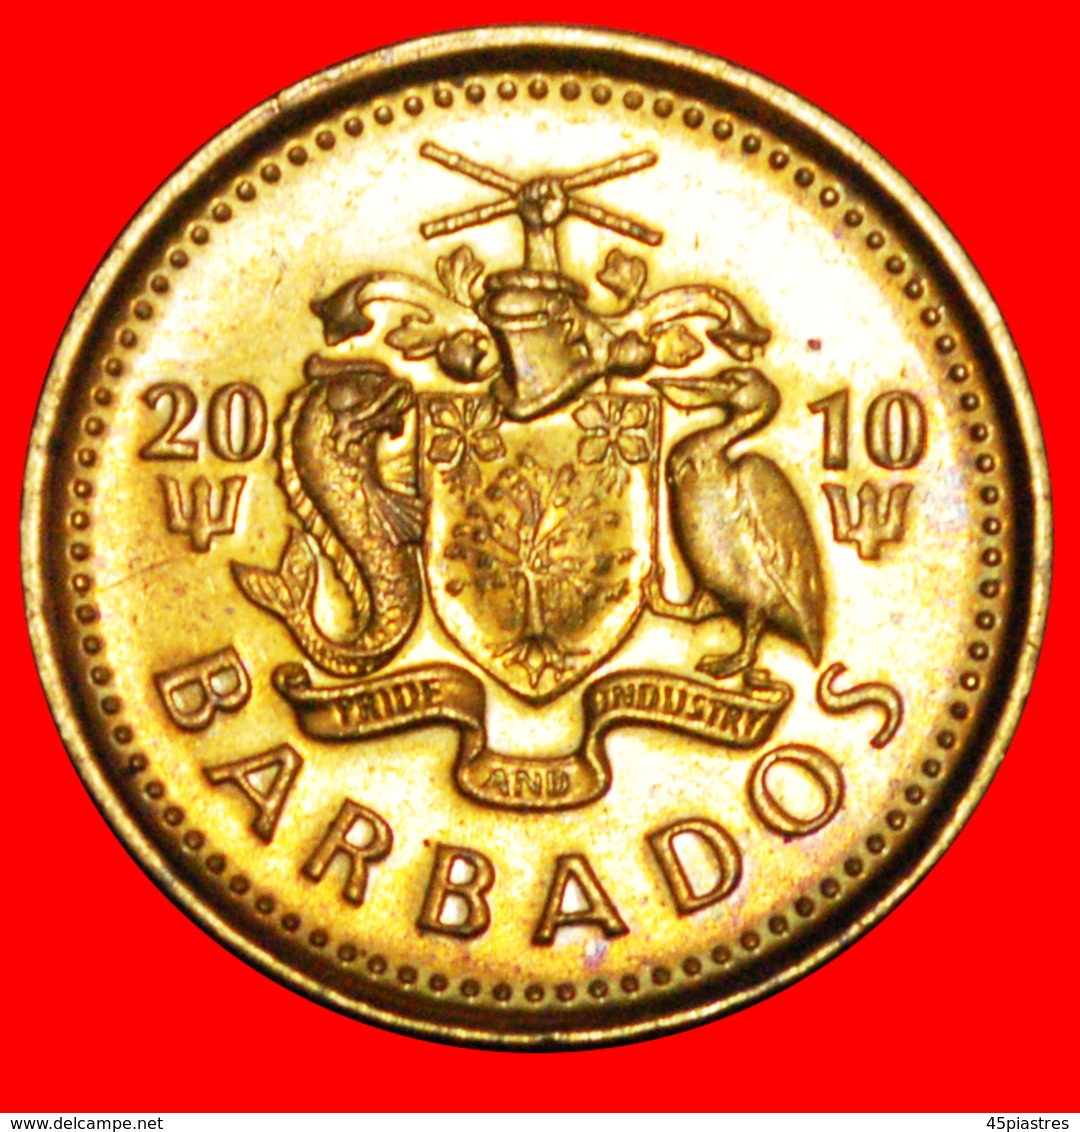 + GREAT BRITAIN (2007-2018): BARBADOS ★ 5 CENTS 2010 MINT LUSTER! LOW START ★ NO RESERVE! - Barbades